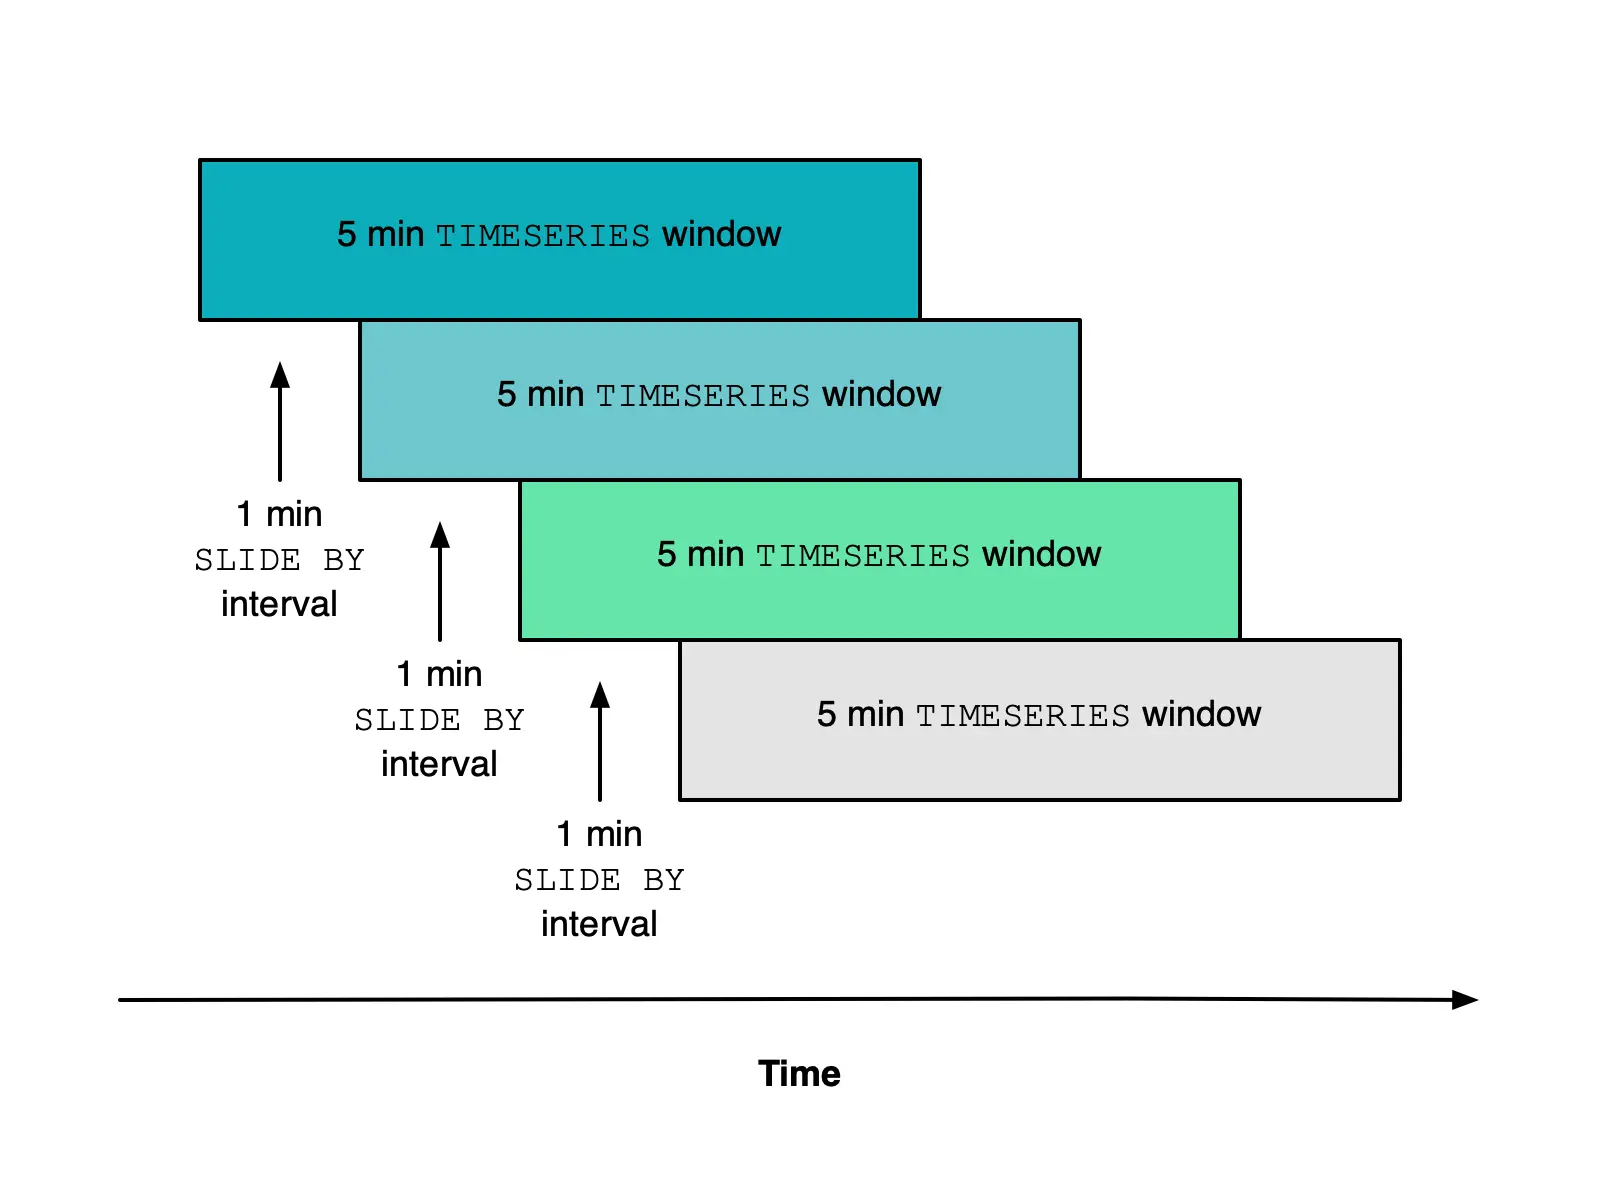 Image representing a TIMESERIES query using the SLIDE BY clause